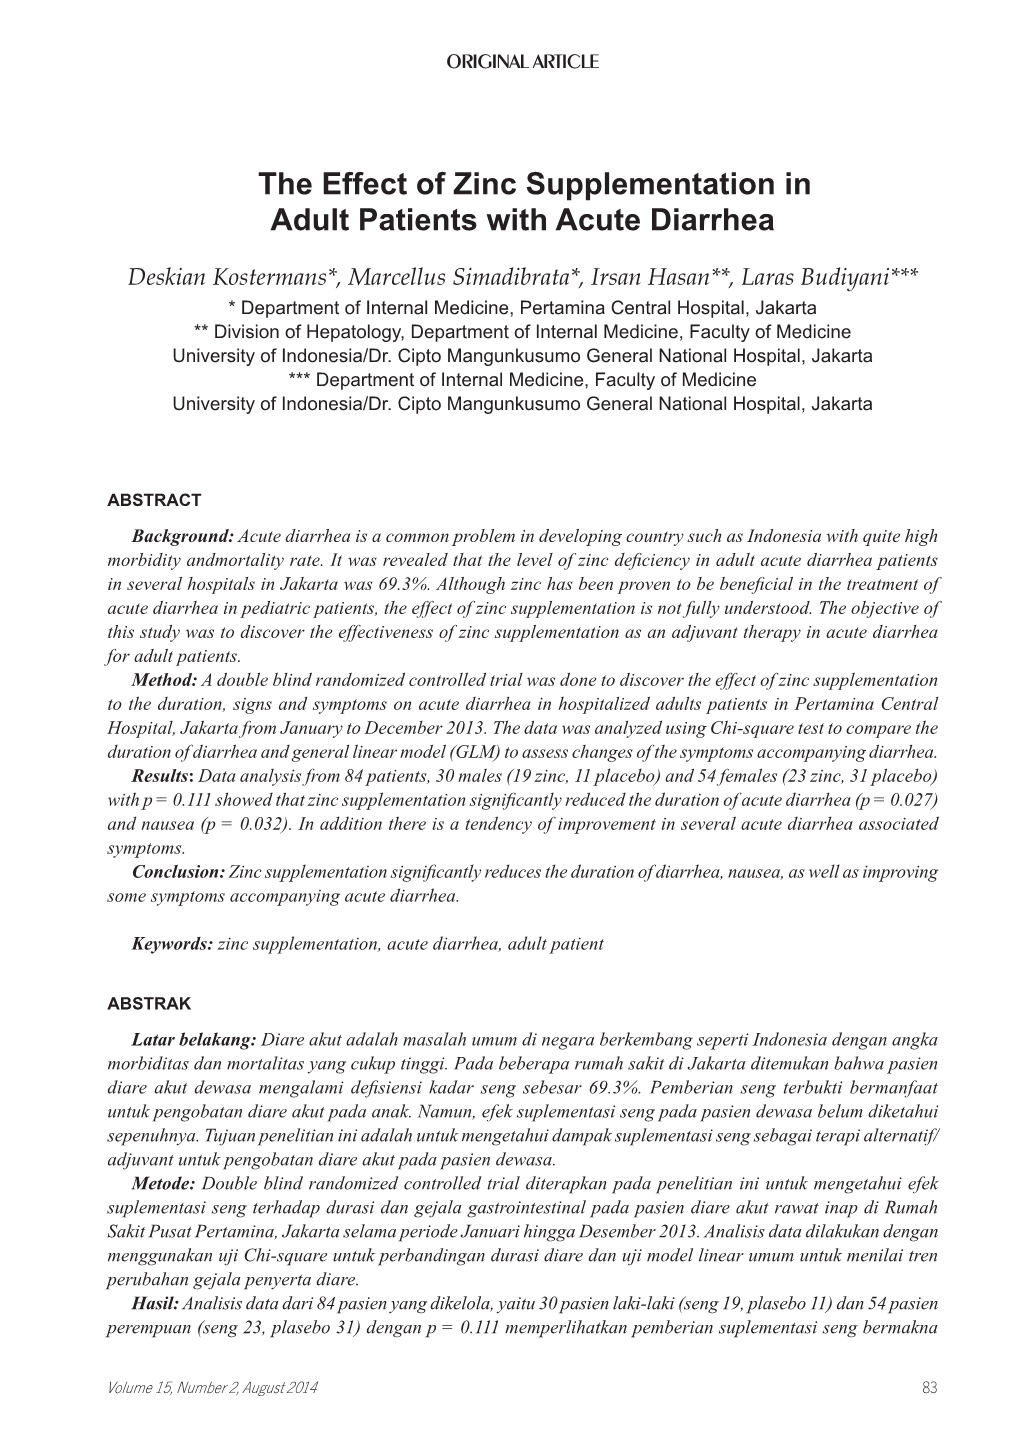 The Effect of Zinc Supplementation in Adult Patients with Acute Diarrhea